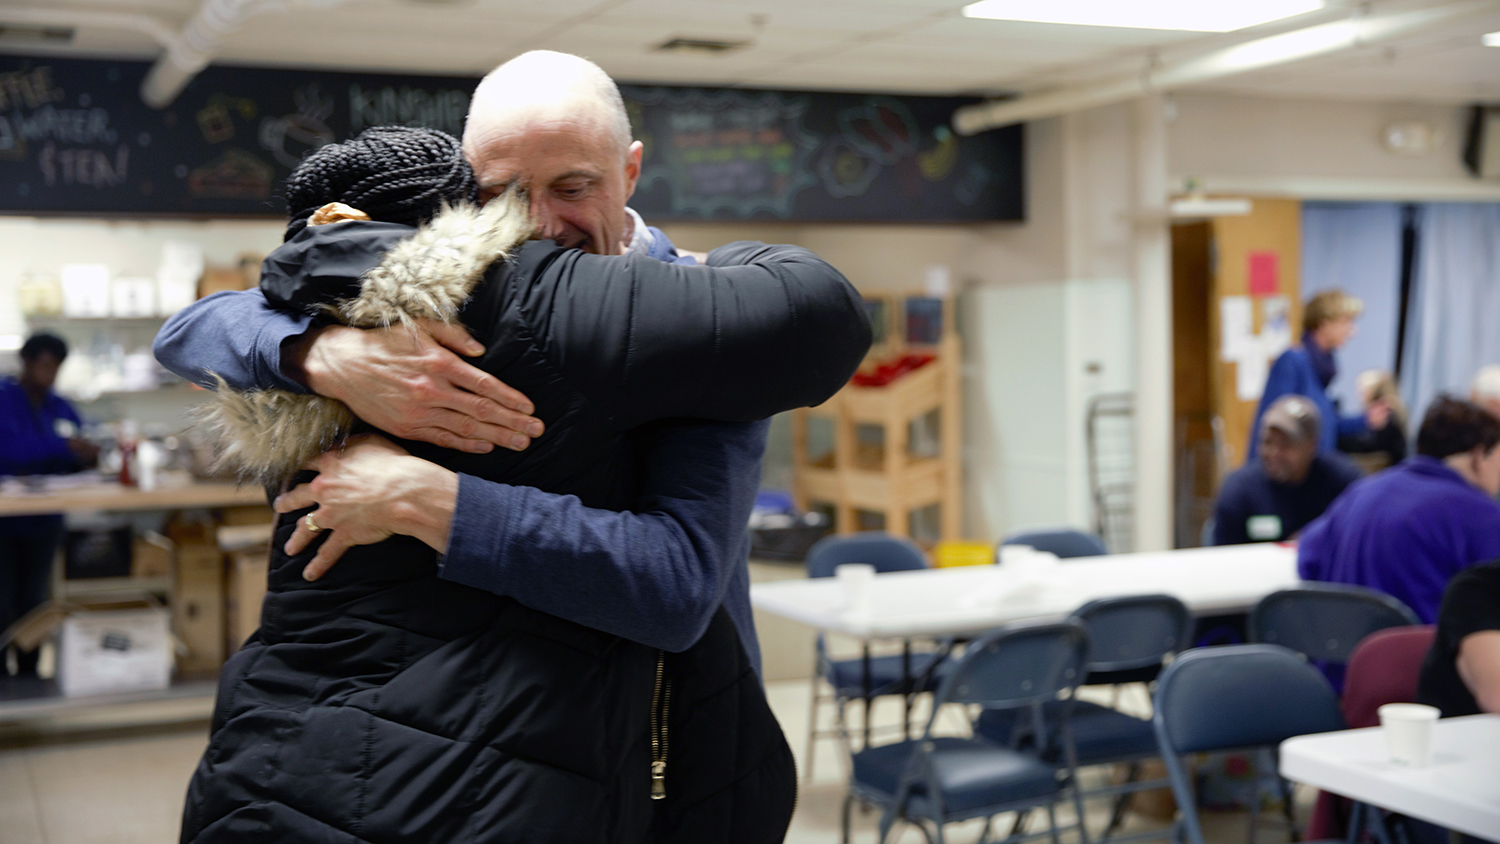 Vincent Noth, dressed in a dark sweater, hugs a woman in a heavy winter coat who is a community member at Kinship Community Food Center. The center is in the basement of St. Casmir Catholic Church, where dozens of people have gathered for dinner in a brightly lit room lined with tables and chairs.  